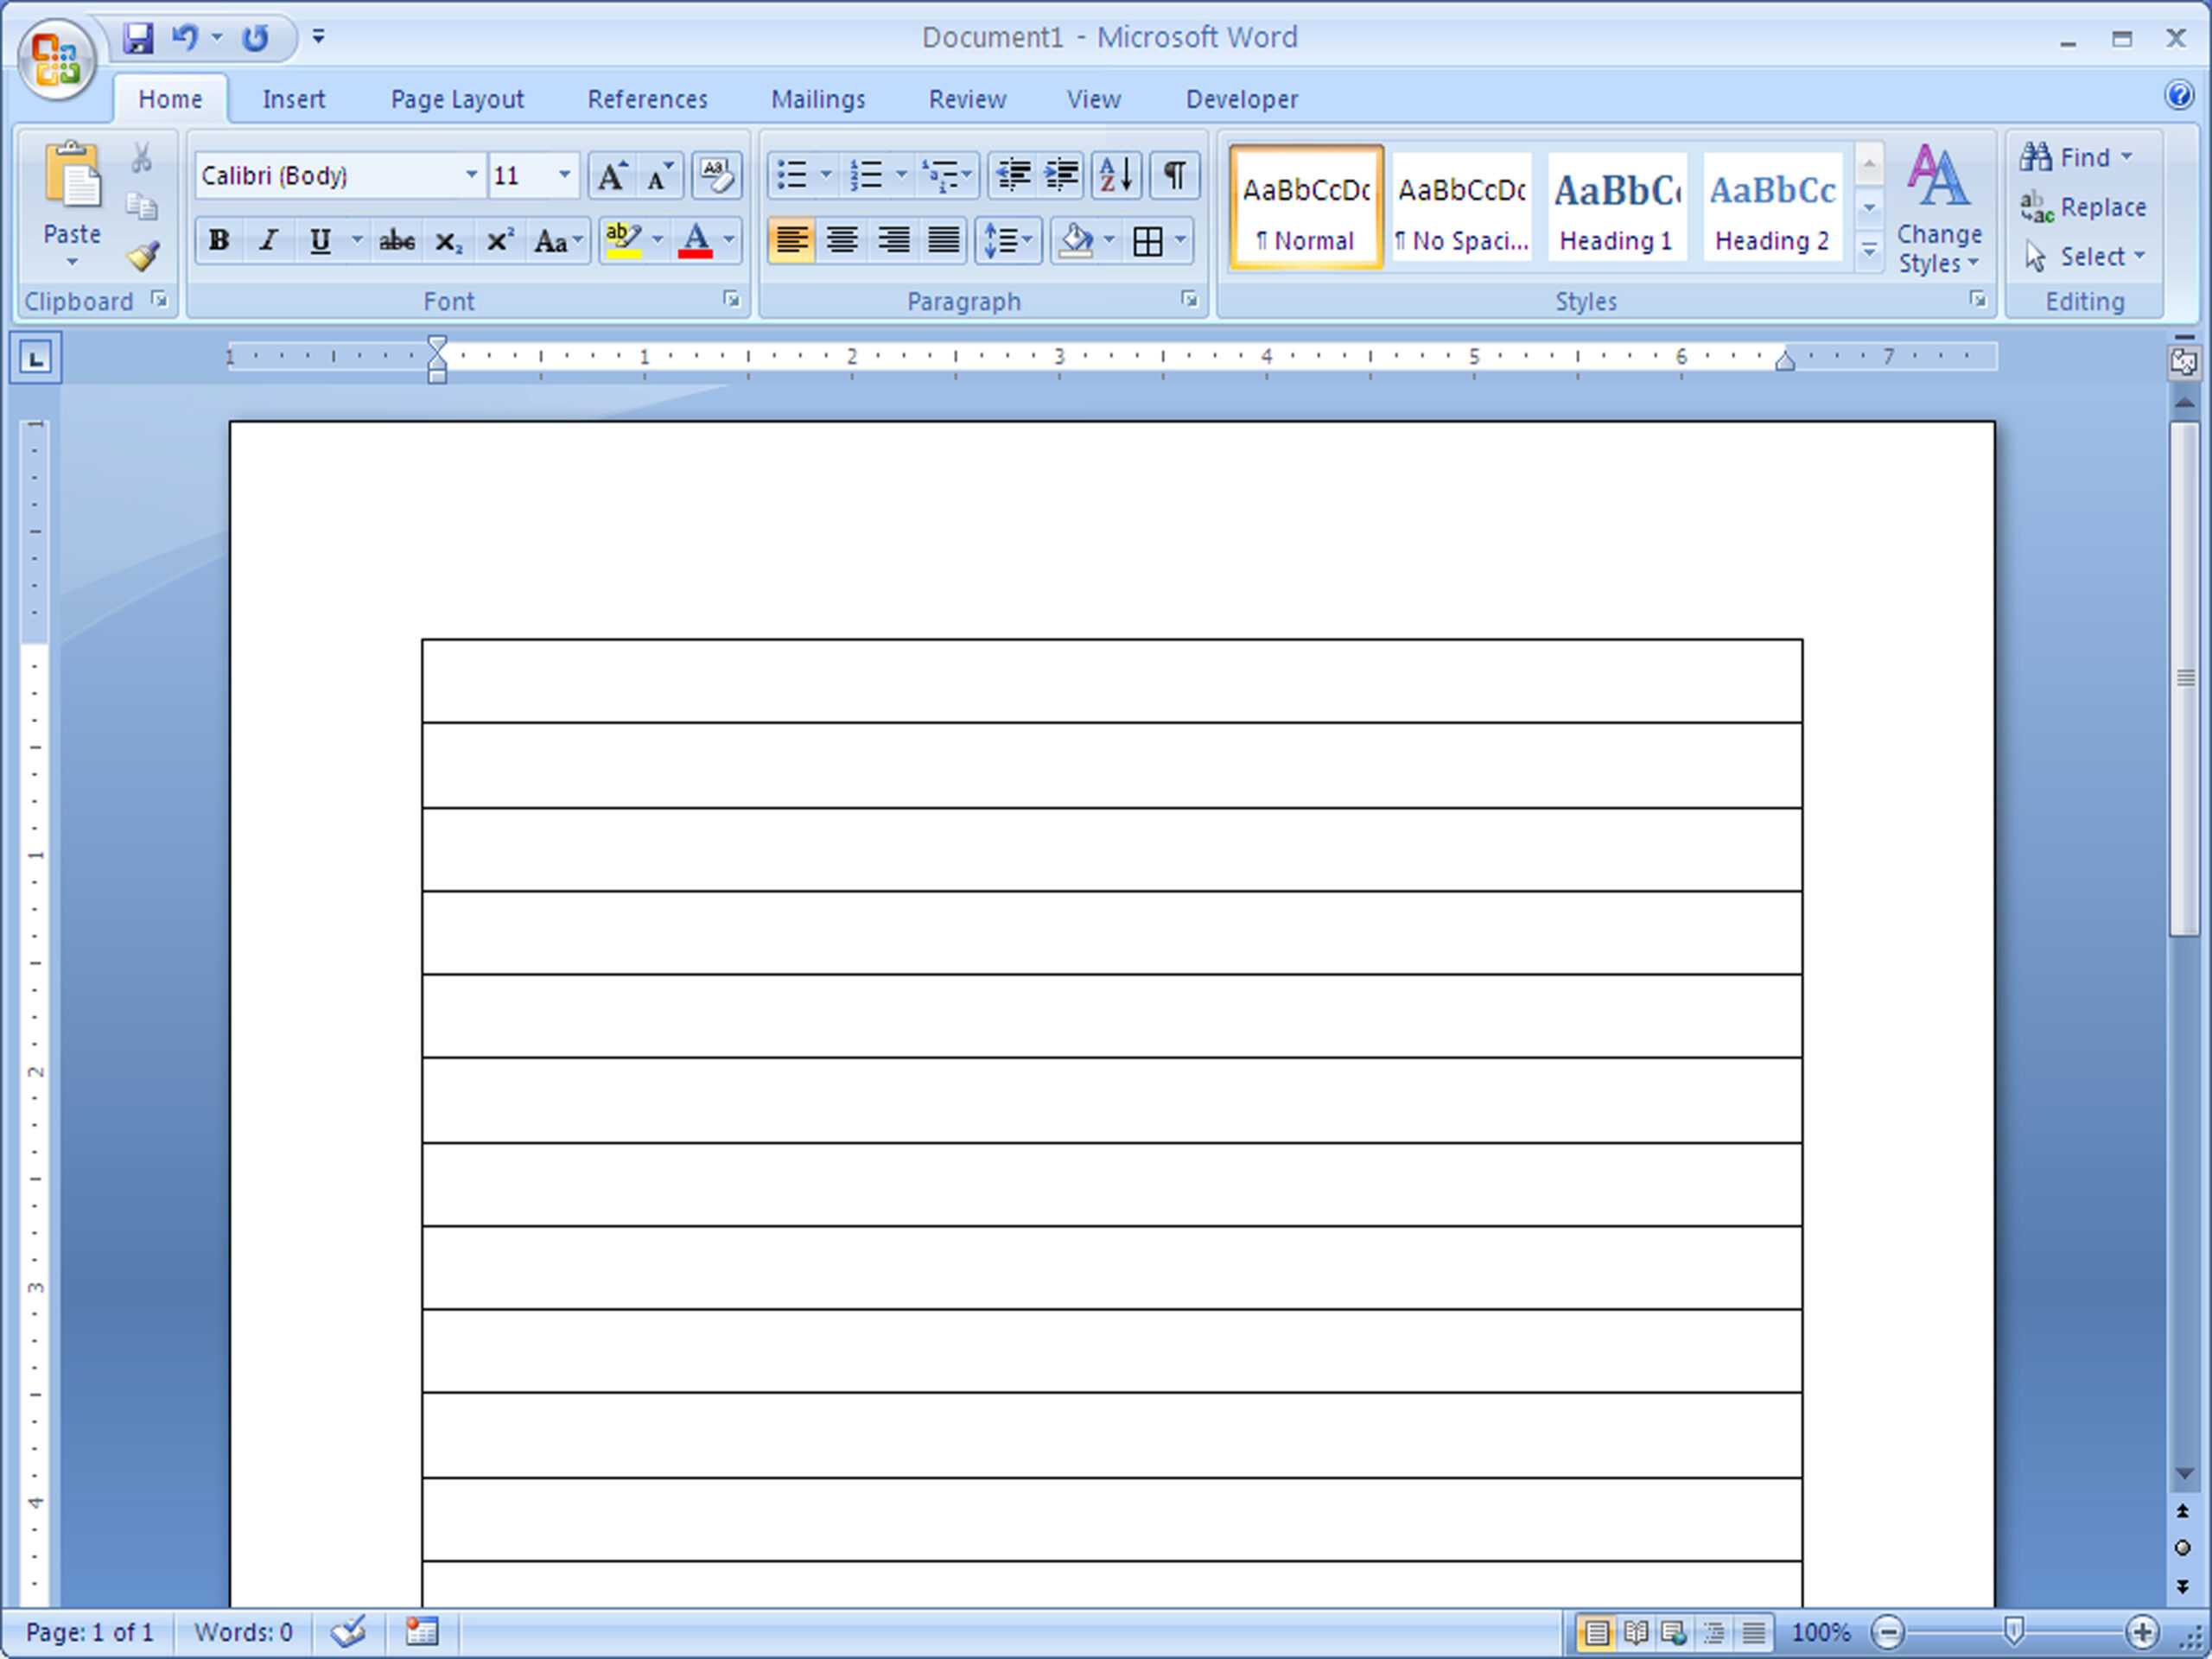 How To Make Lined Paper In Word 2007: 4 Steps (With Pictures) With Notebook Paper Template For Word 2010